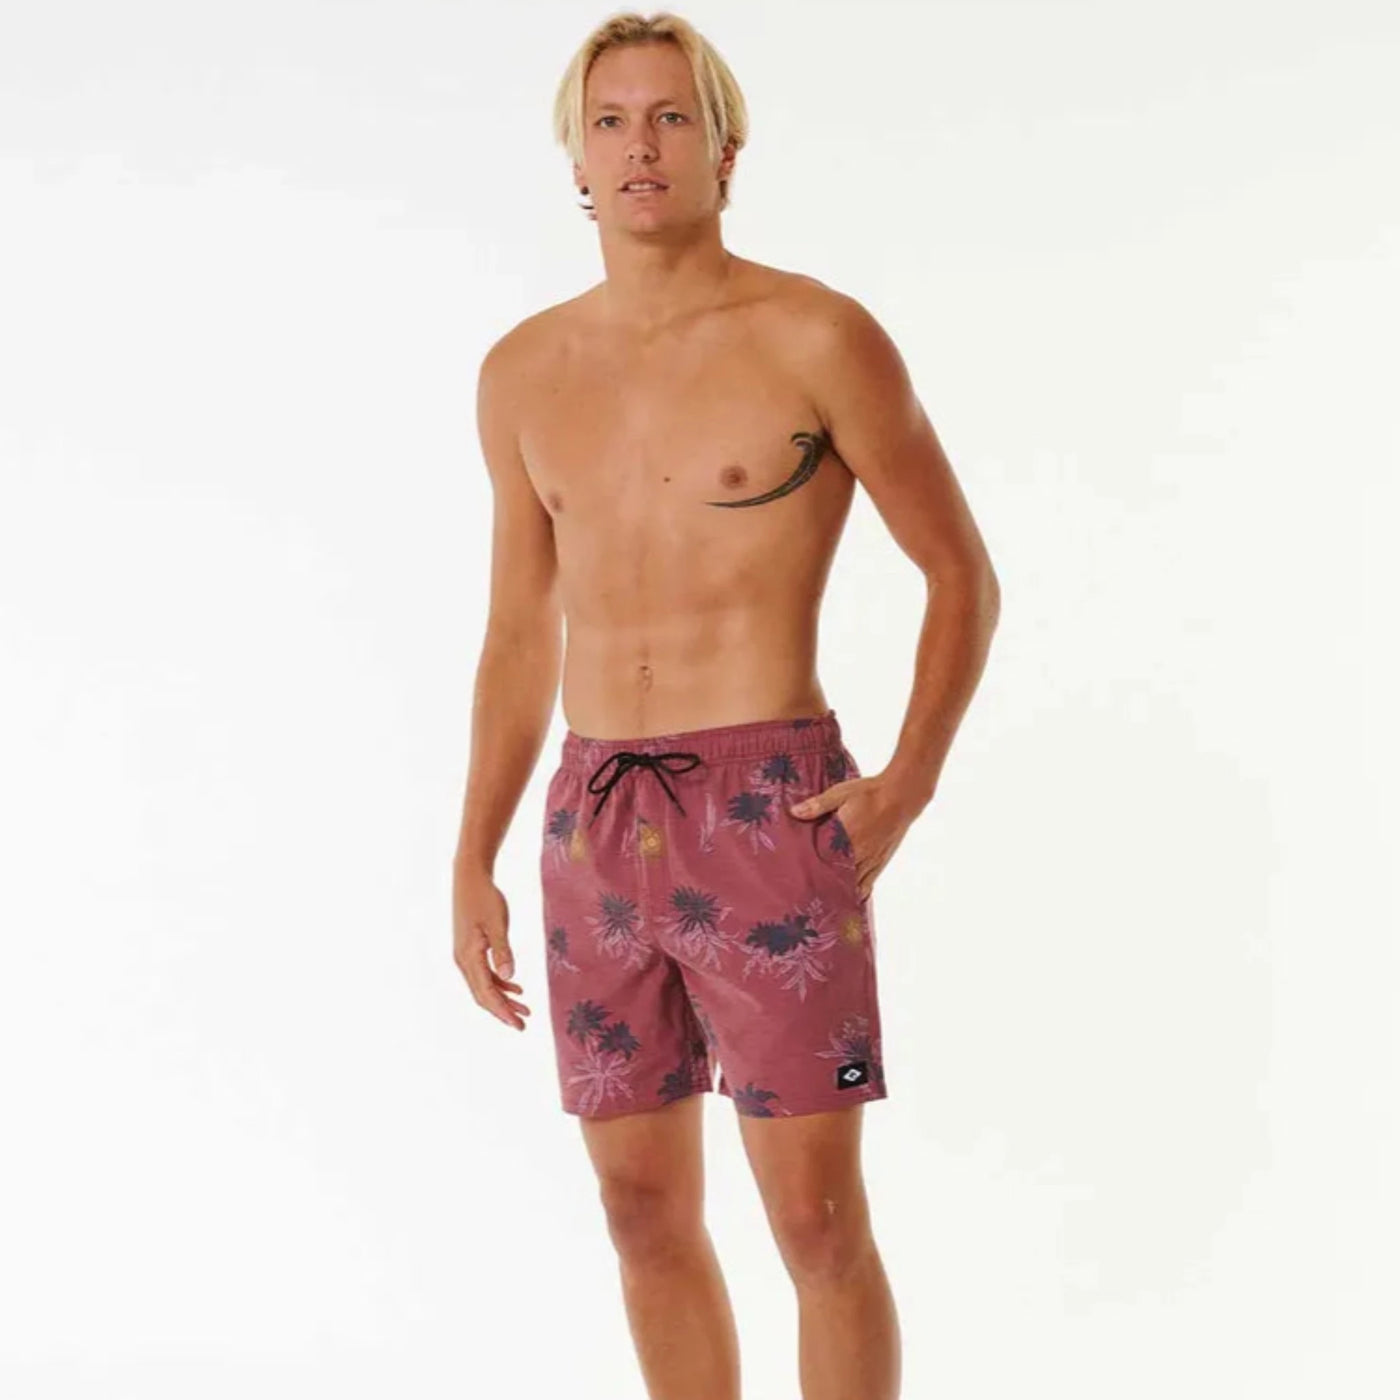 Rip Curl Sun Razed Floral Volley Boardshorts - Apple Butter